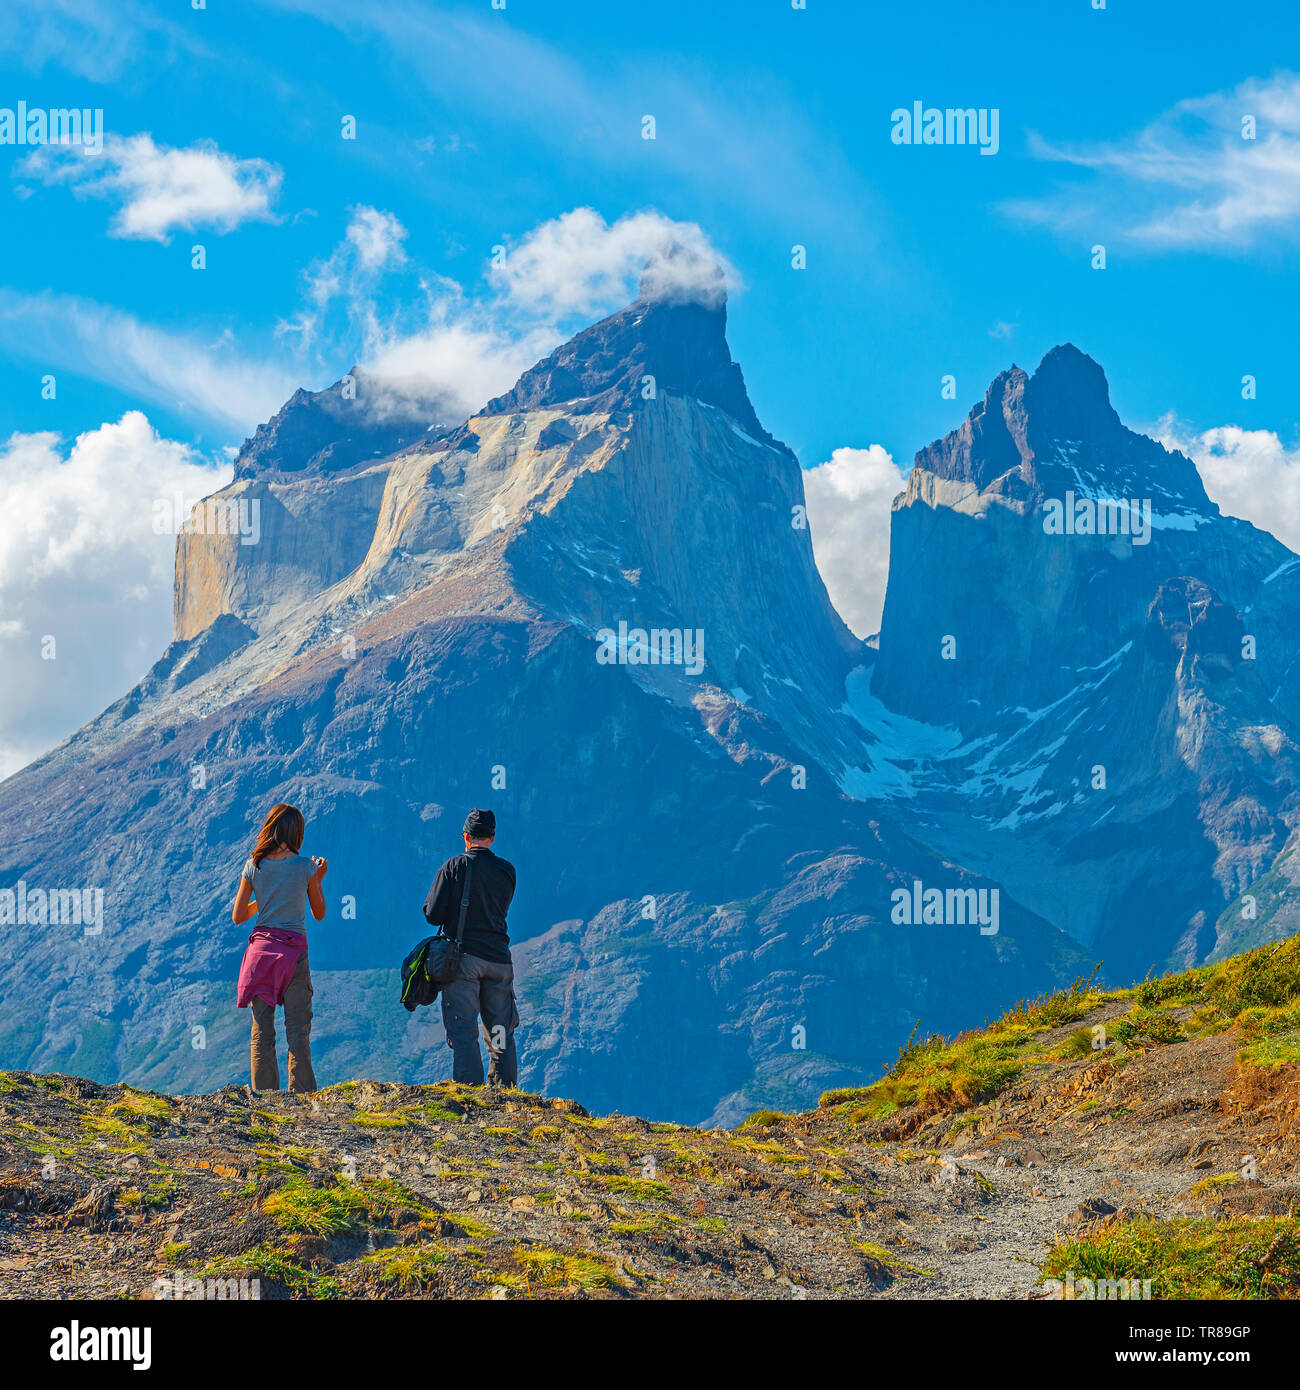 Two tourist, man and woman, looking to the Andes peaks of Cuernos del Paine, Torres del Paine national park, Puerto Natales, Patagonia, Chile. Stock Photo